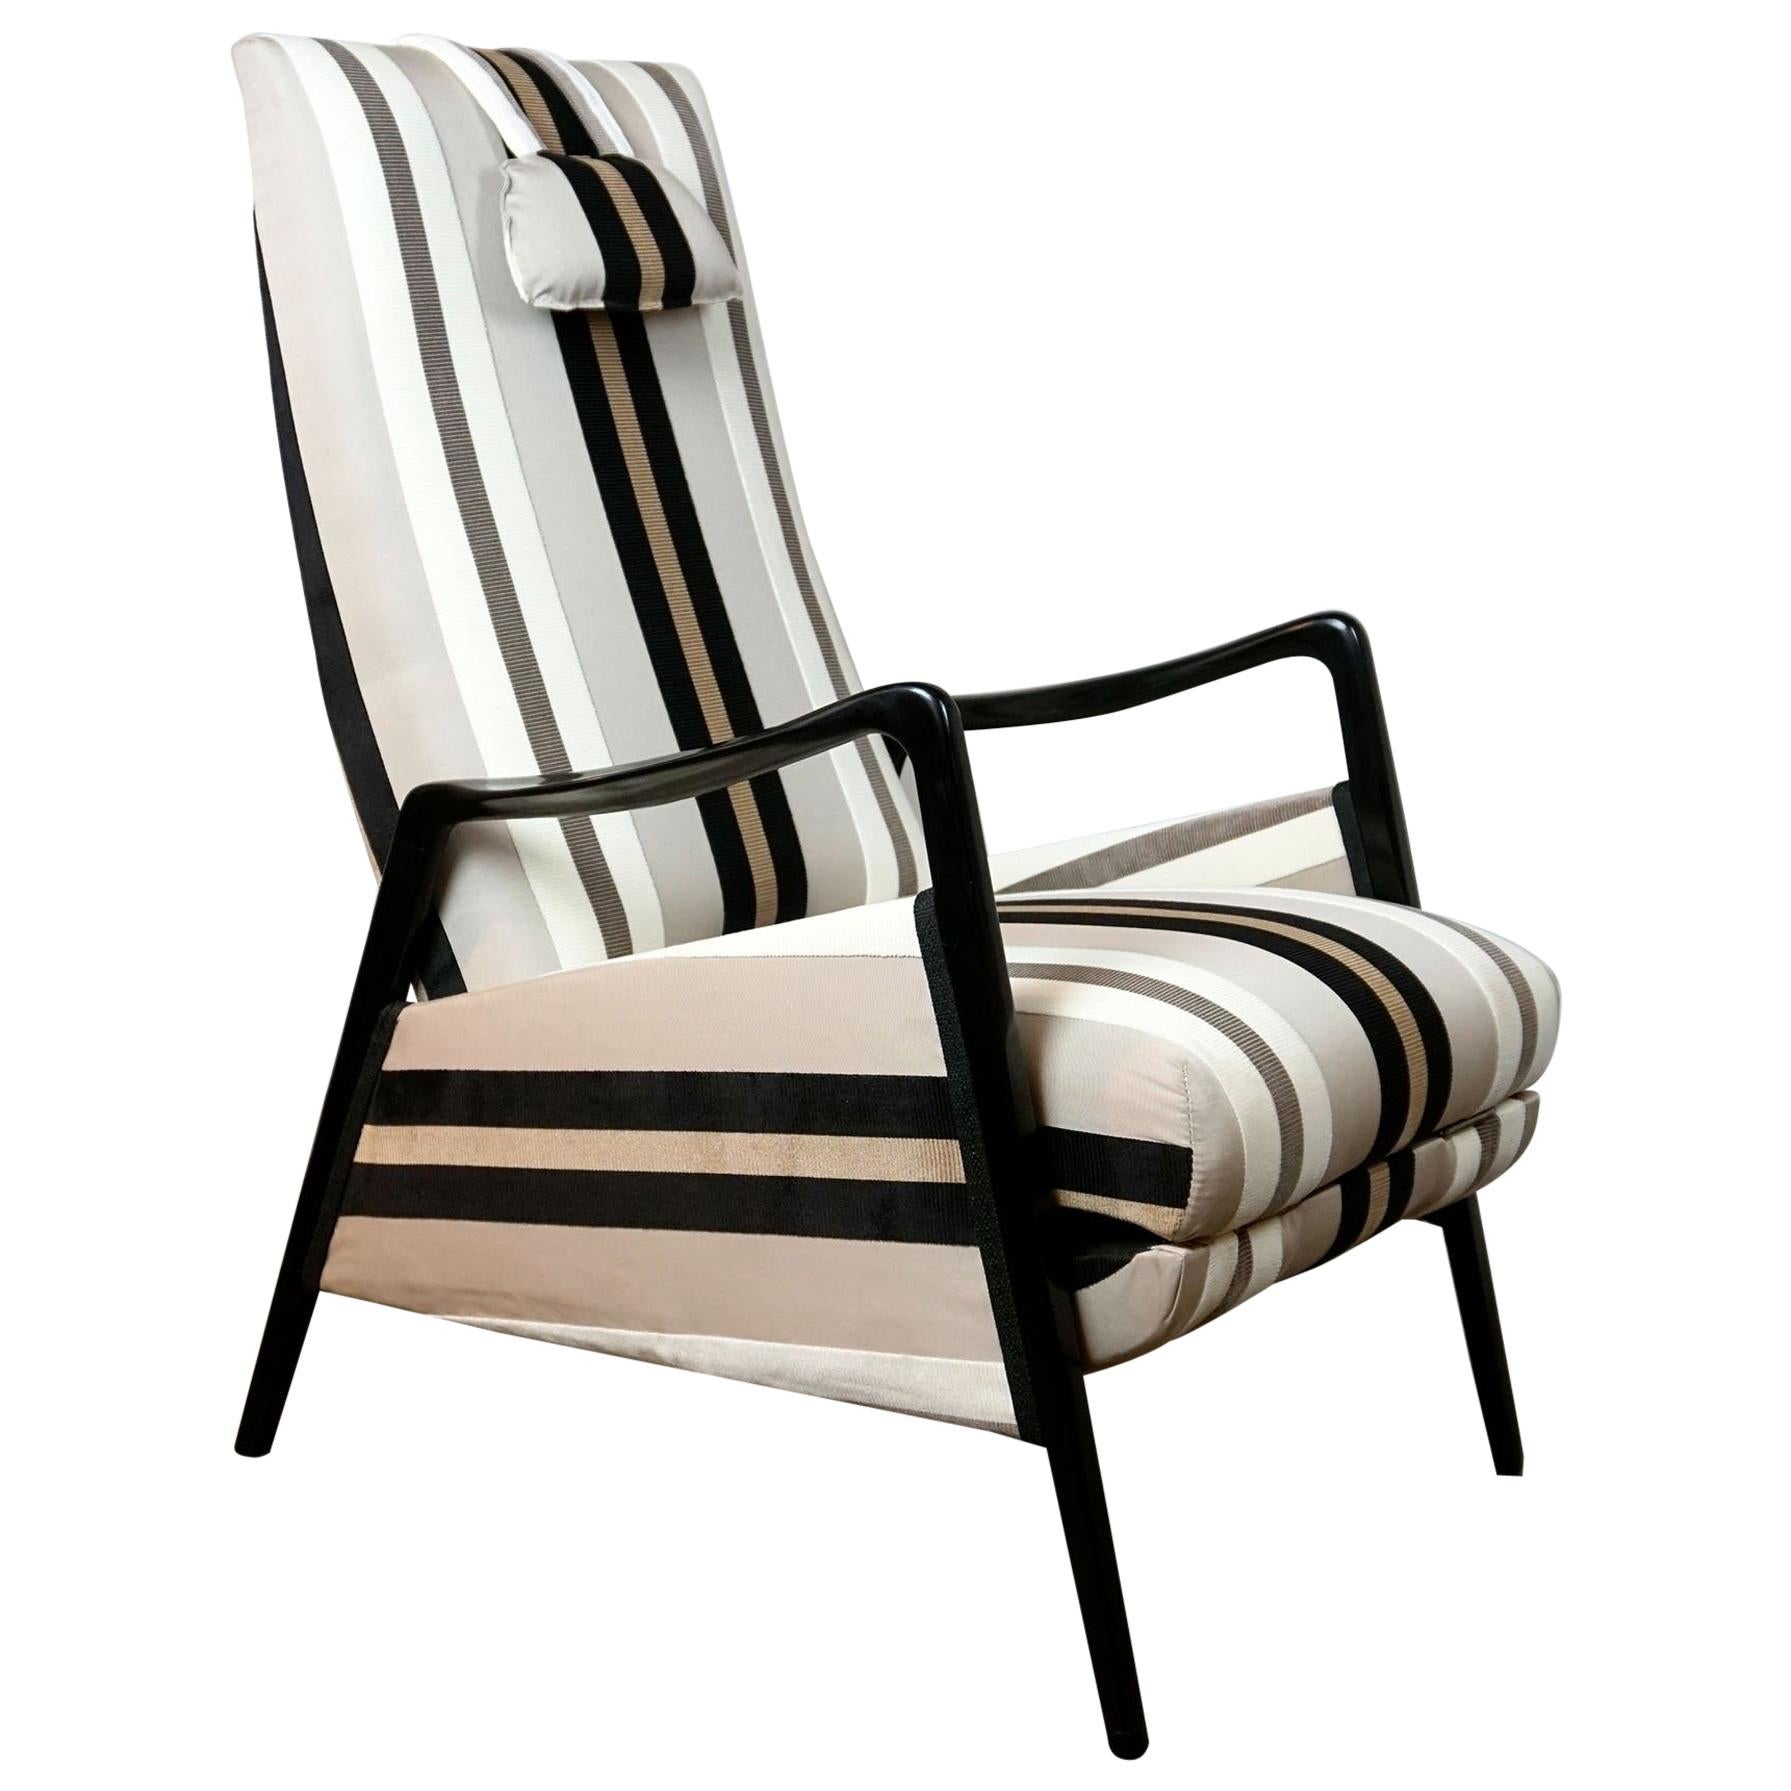 Italian Midcentury Reclinable Lounge Chair in the Style of Gio Ponti